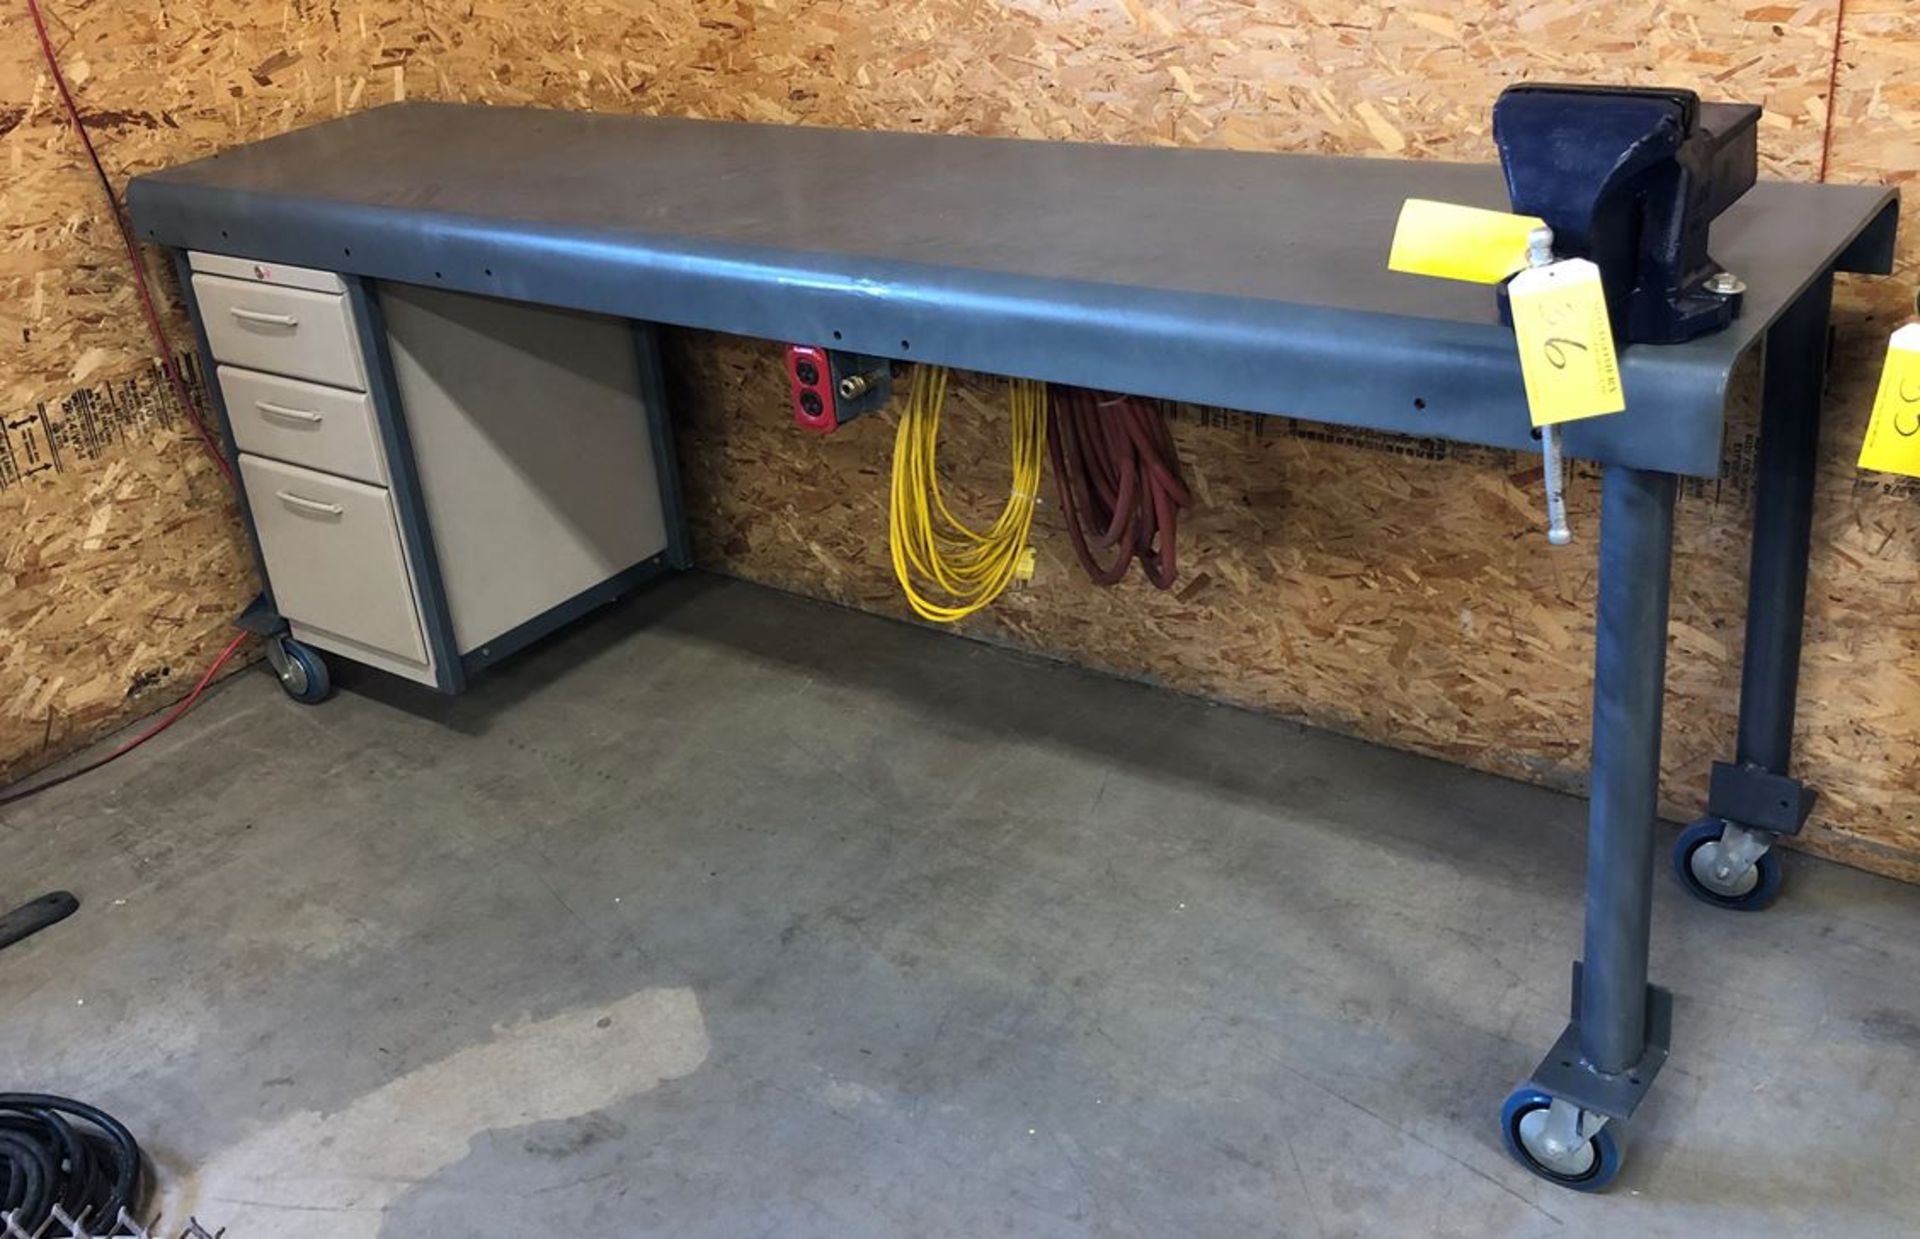 STEEL WELDING TABLE 24IN X 96IN W/ 6IN BENCH VISE, POWER AND AIR OUTLETS, HOSES, POWER CORDS